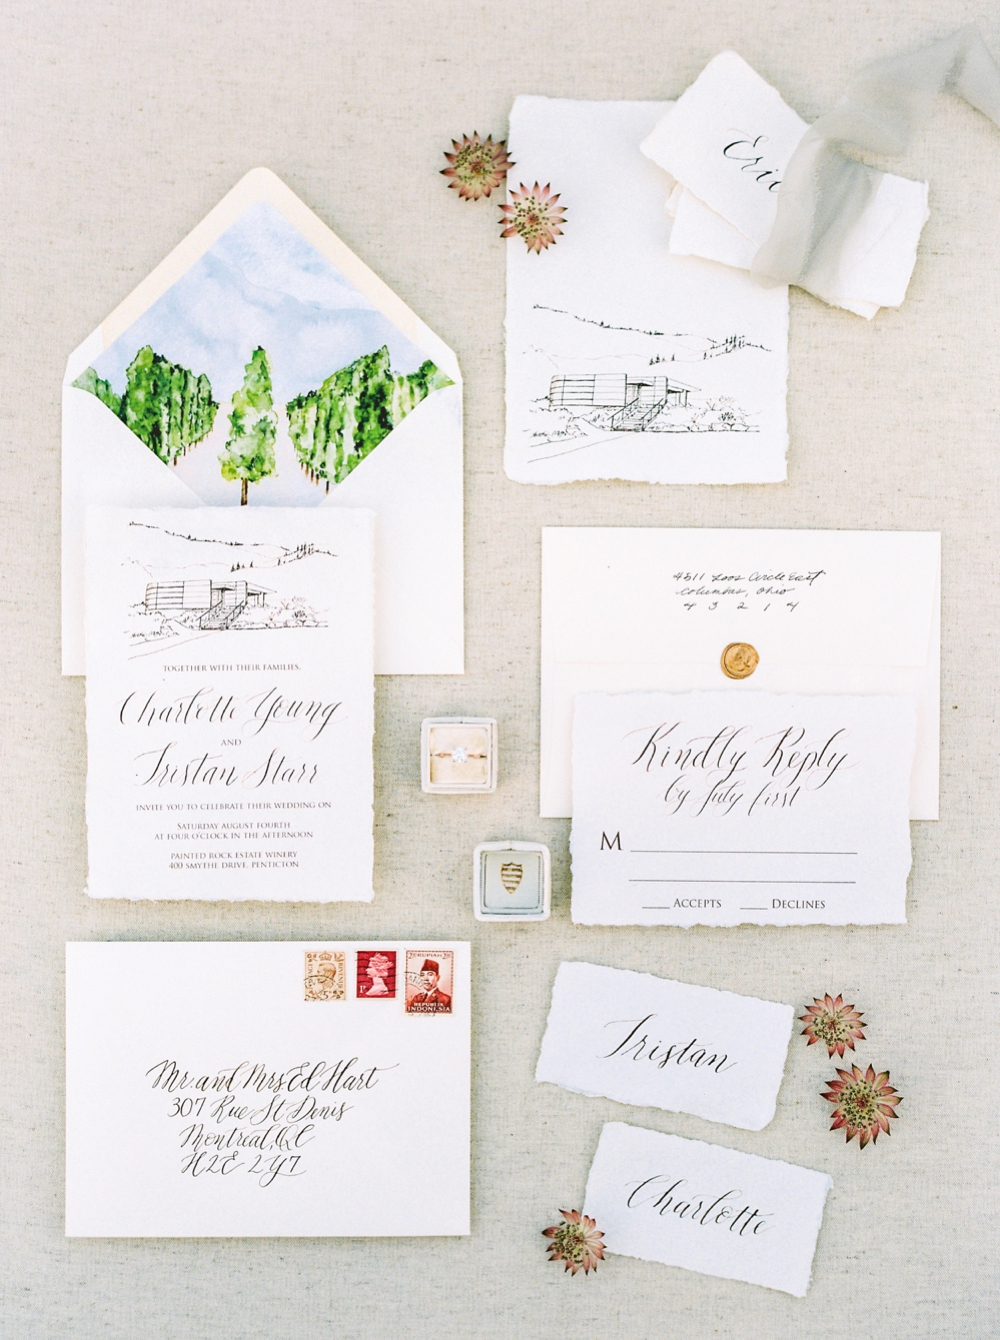 watercolor painting and calligraphy wedding stationery invitation | Painted Rock Winery | Penticton wedding photographer | Kelowna Wedding photography | Okanagan Wedding photographers